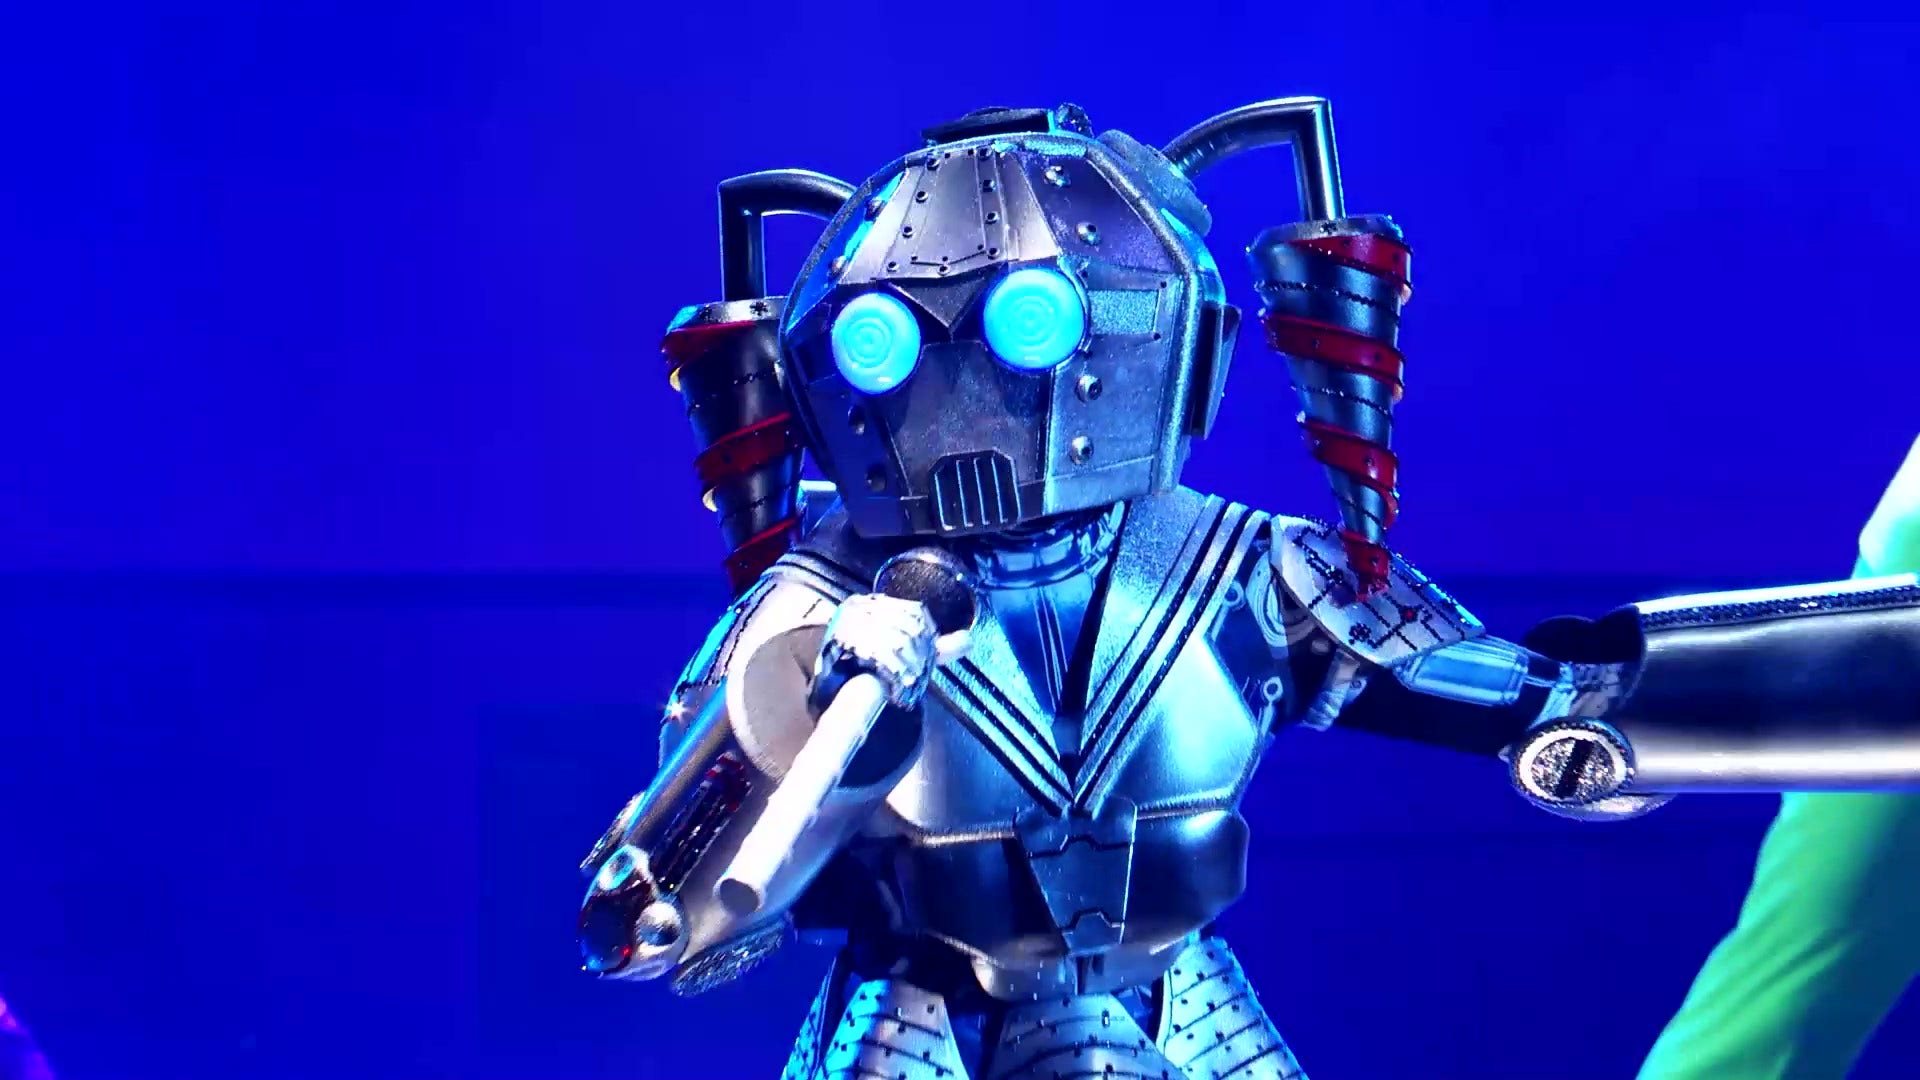 The Masked Singer S8 Robo Girl Performs "Bad Cinderella" 2022-10-11